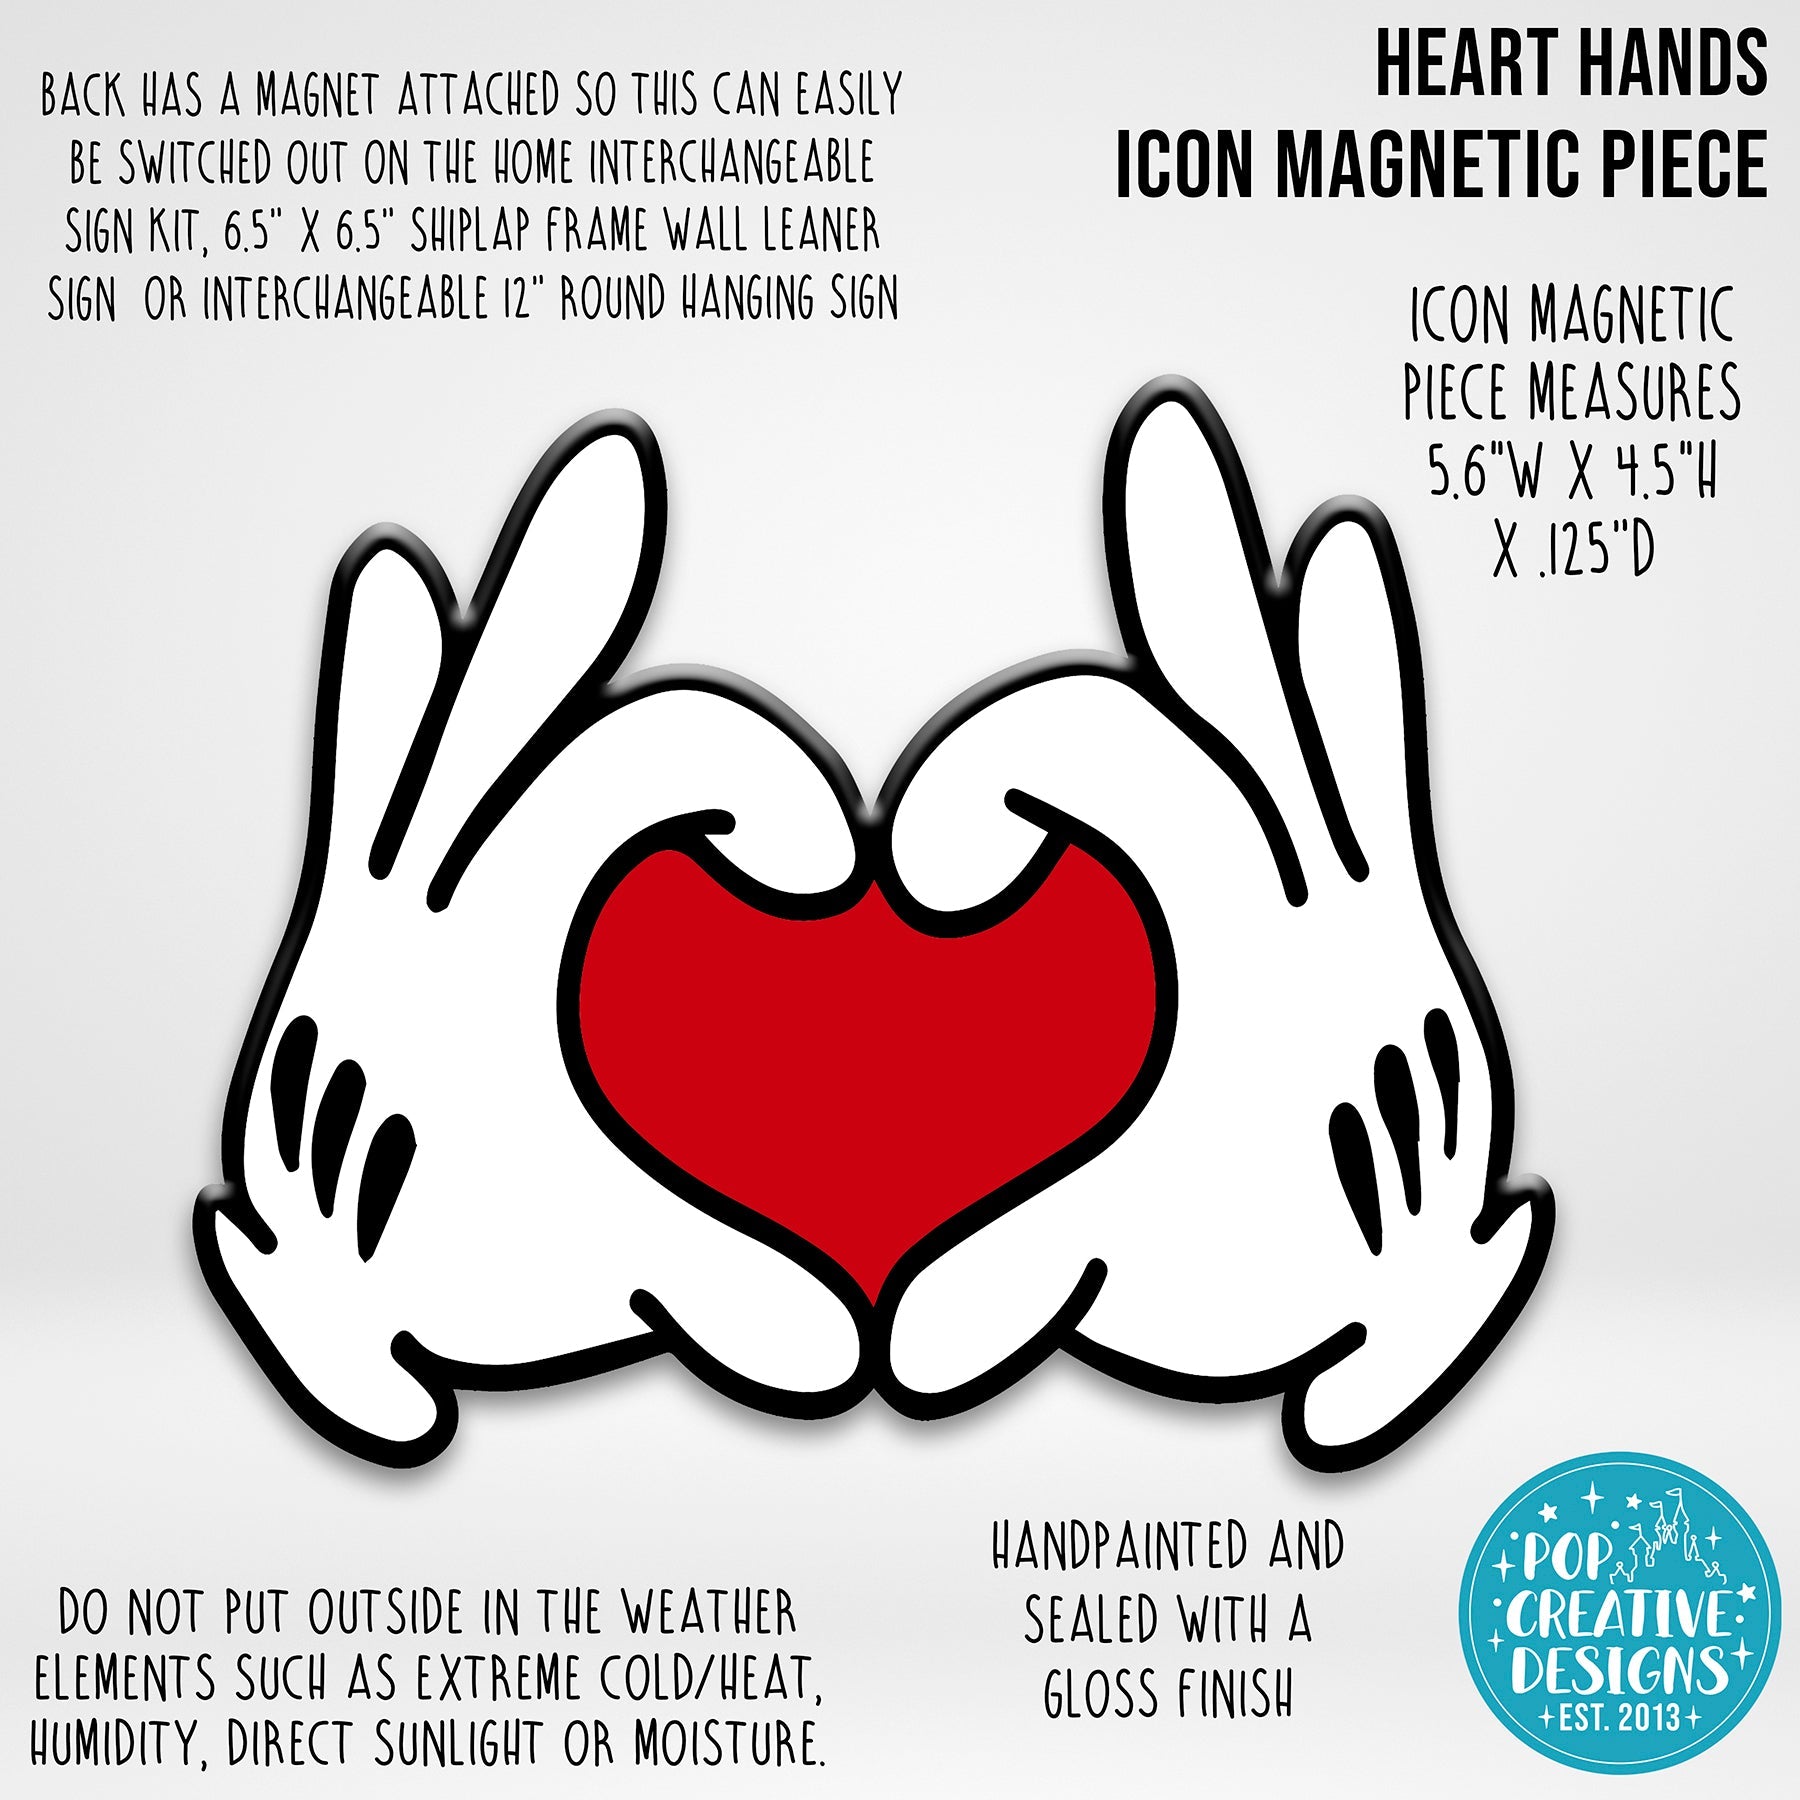 Heart Hands Icon Magnetic Piece